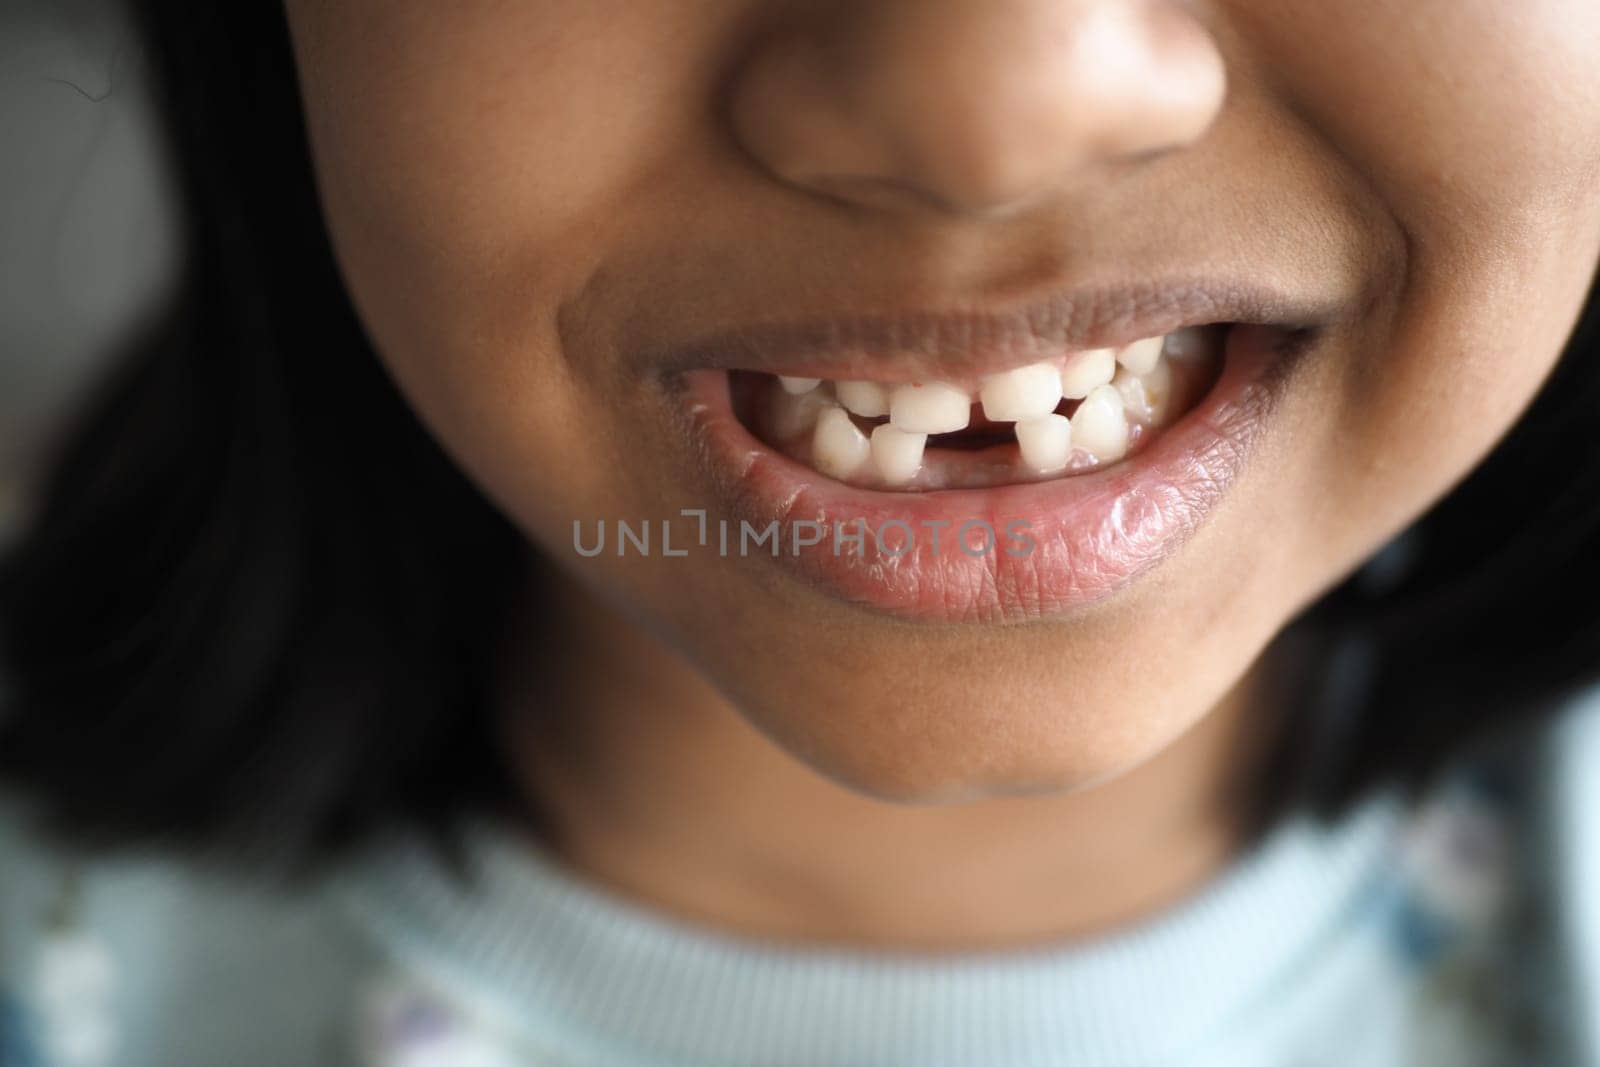 detail shot of child with teeth missing by towfiq007